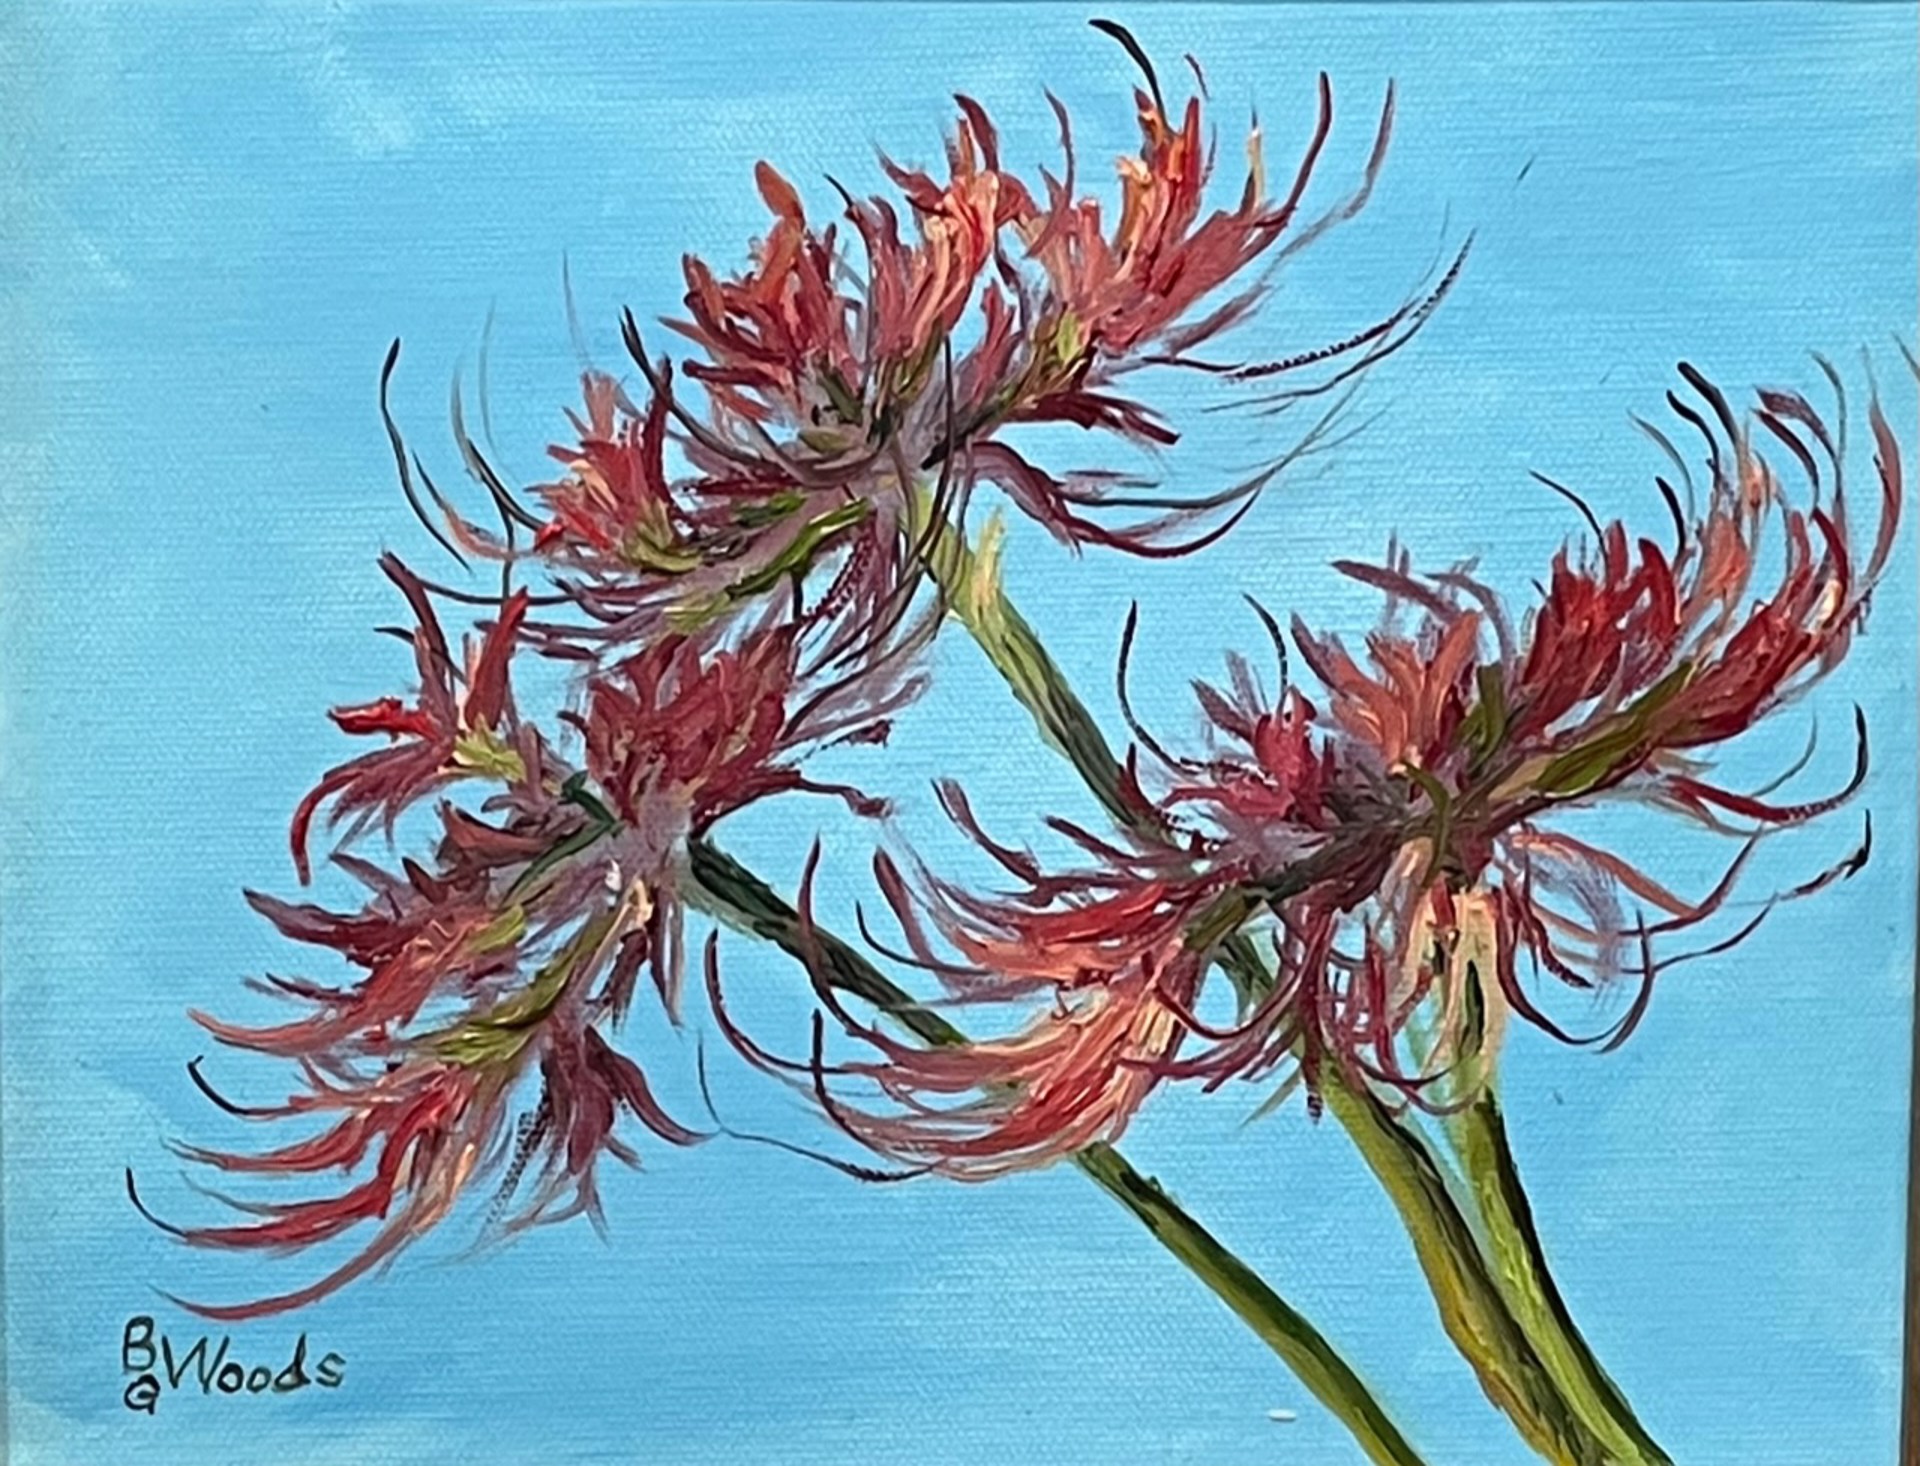 Spider Lilies by Beverly Woods